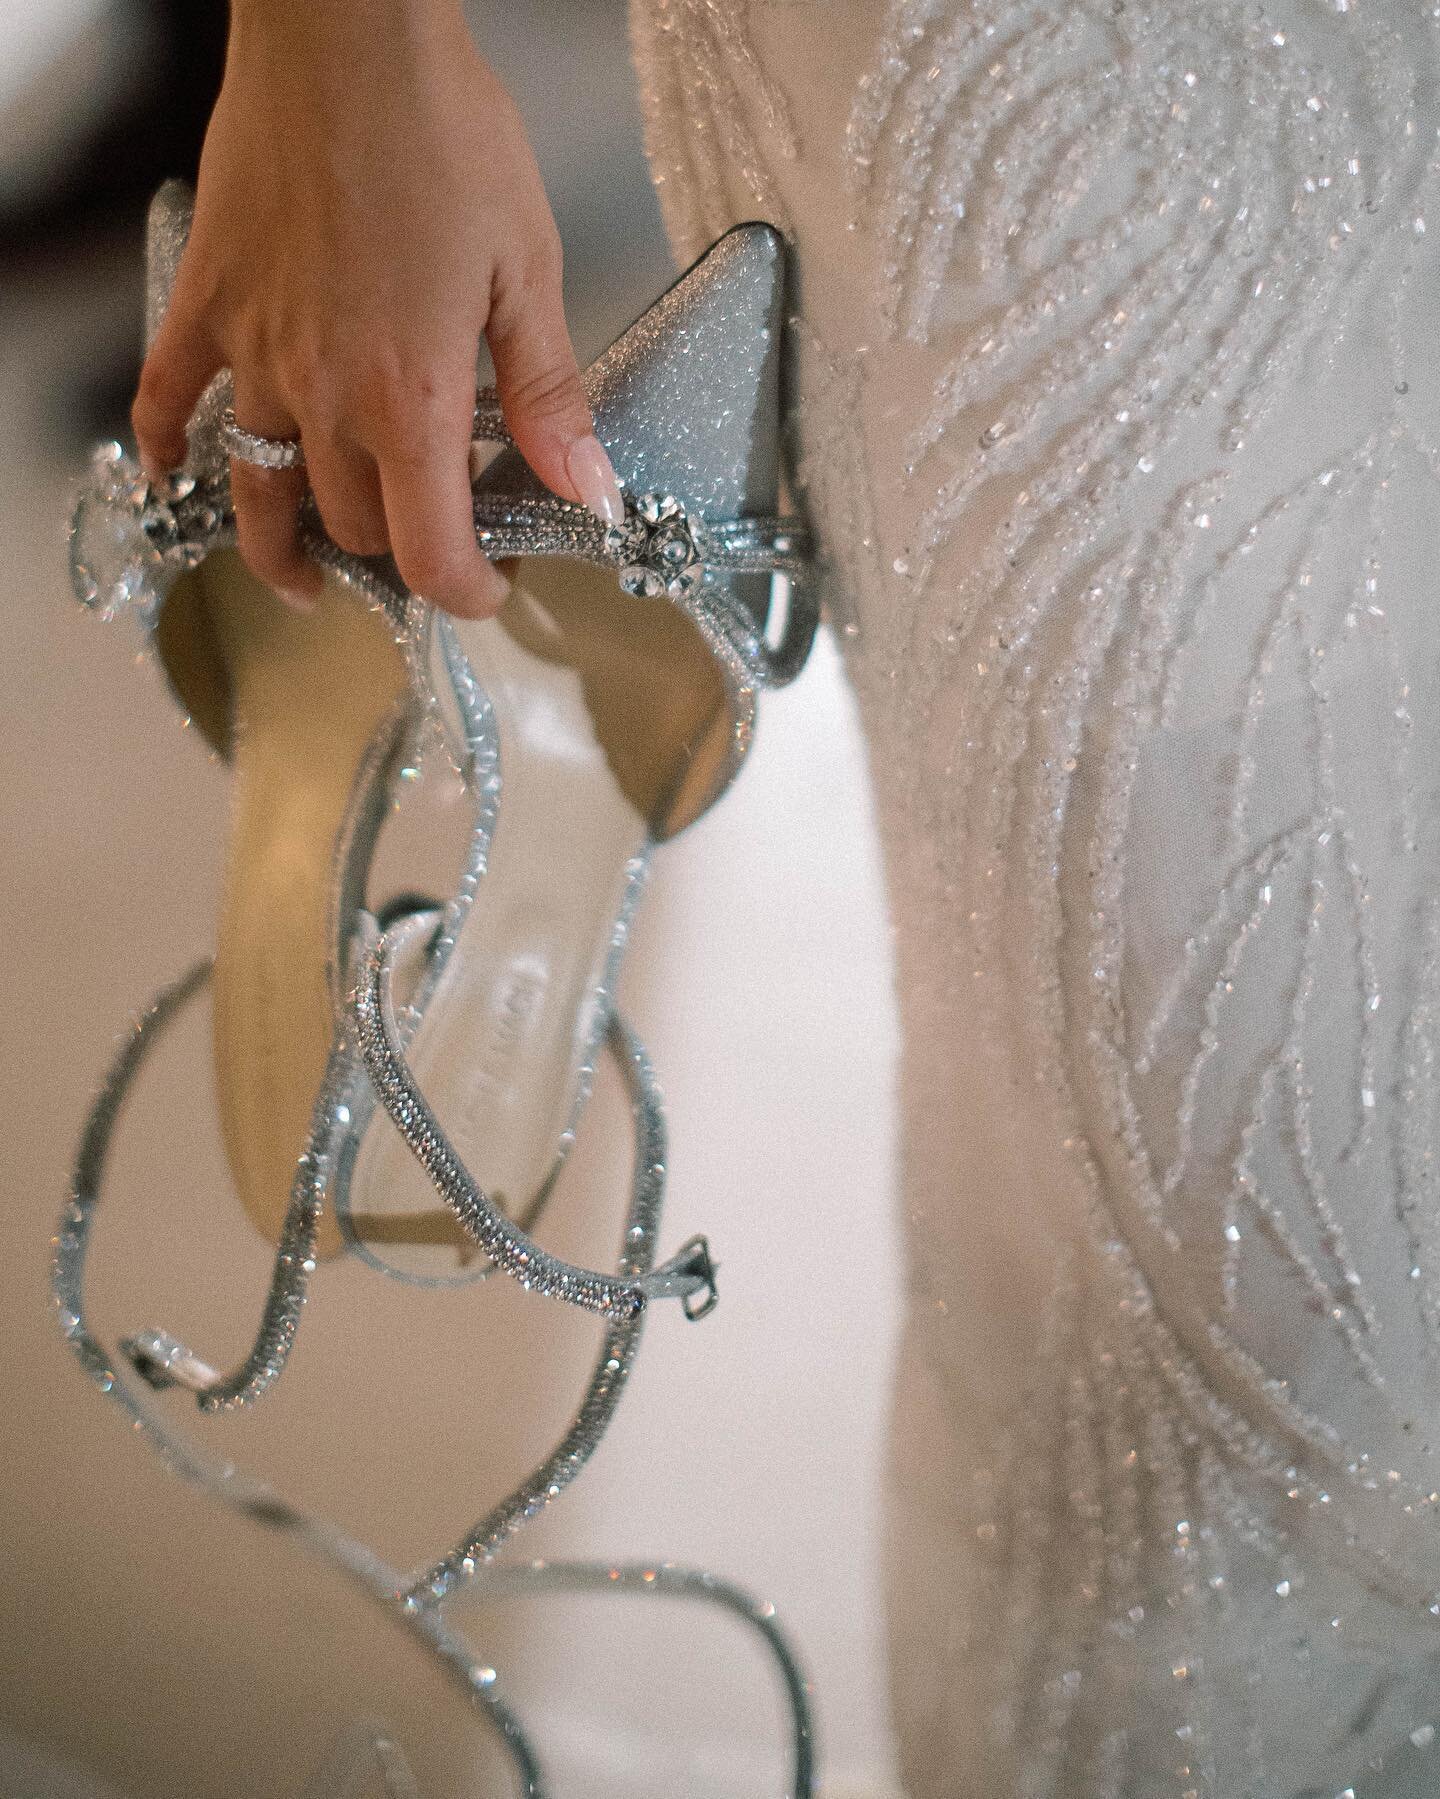 Shoes so beautiful they deserve their own post. ✨
.
.
.
#weddingshoes
#themontagelagunabeach #californiawedding #montagewedding #themontagelagunabeachwedding #californiabride #californiacouple #californiaweddingphotographer #lookslikefilm
#becomingth